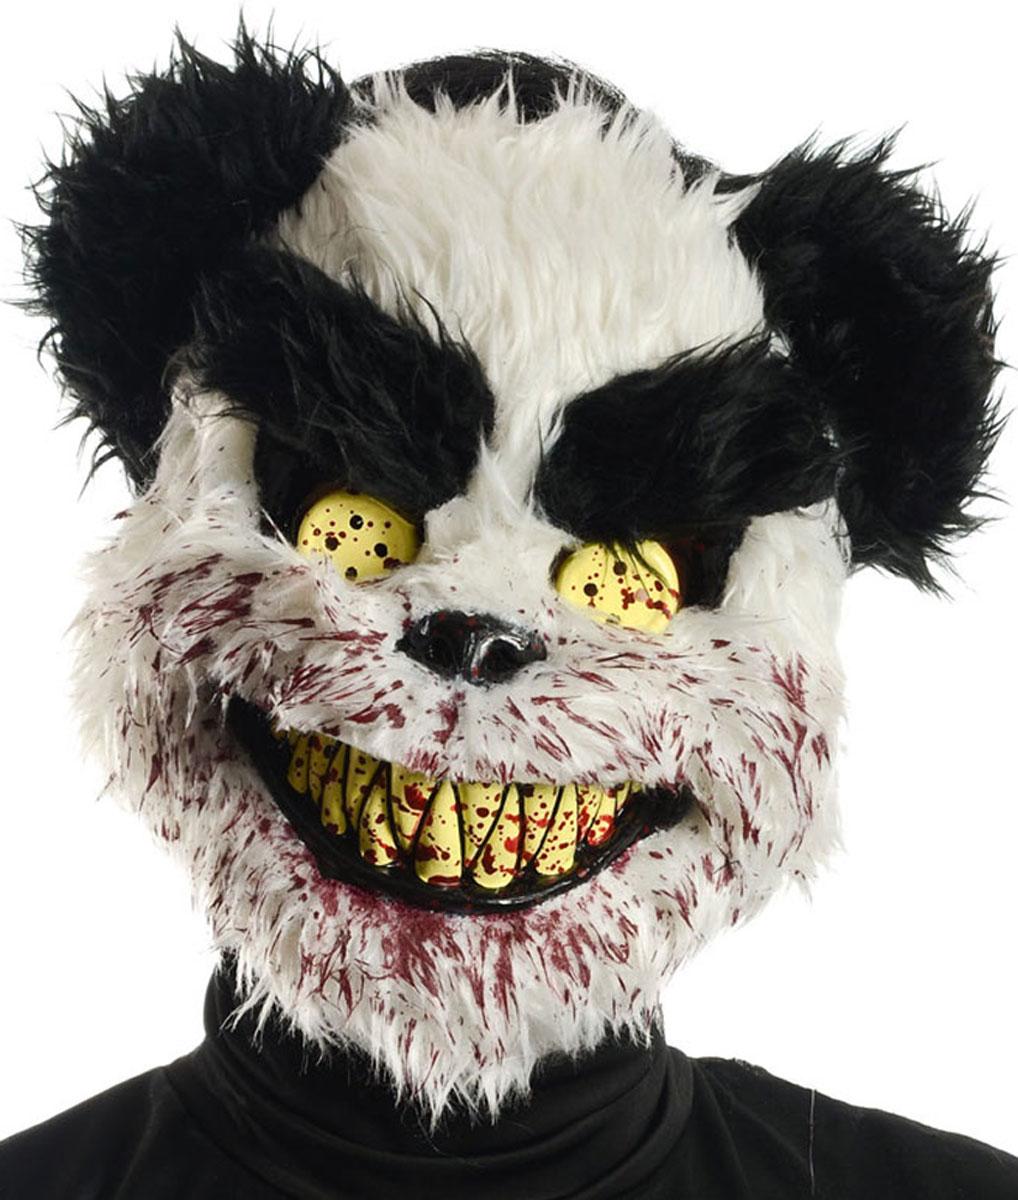 Charles Horror Panda Bear Mask for Halloween by Seasons Vision International SVI and available here at Karnival Costumes online Halloween party shop